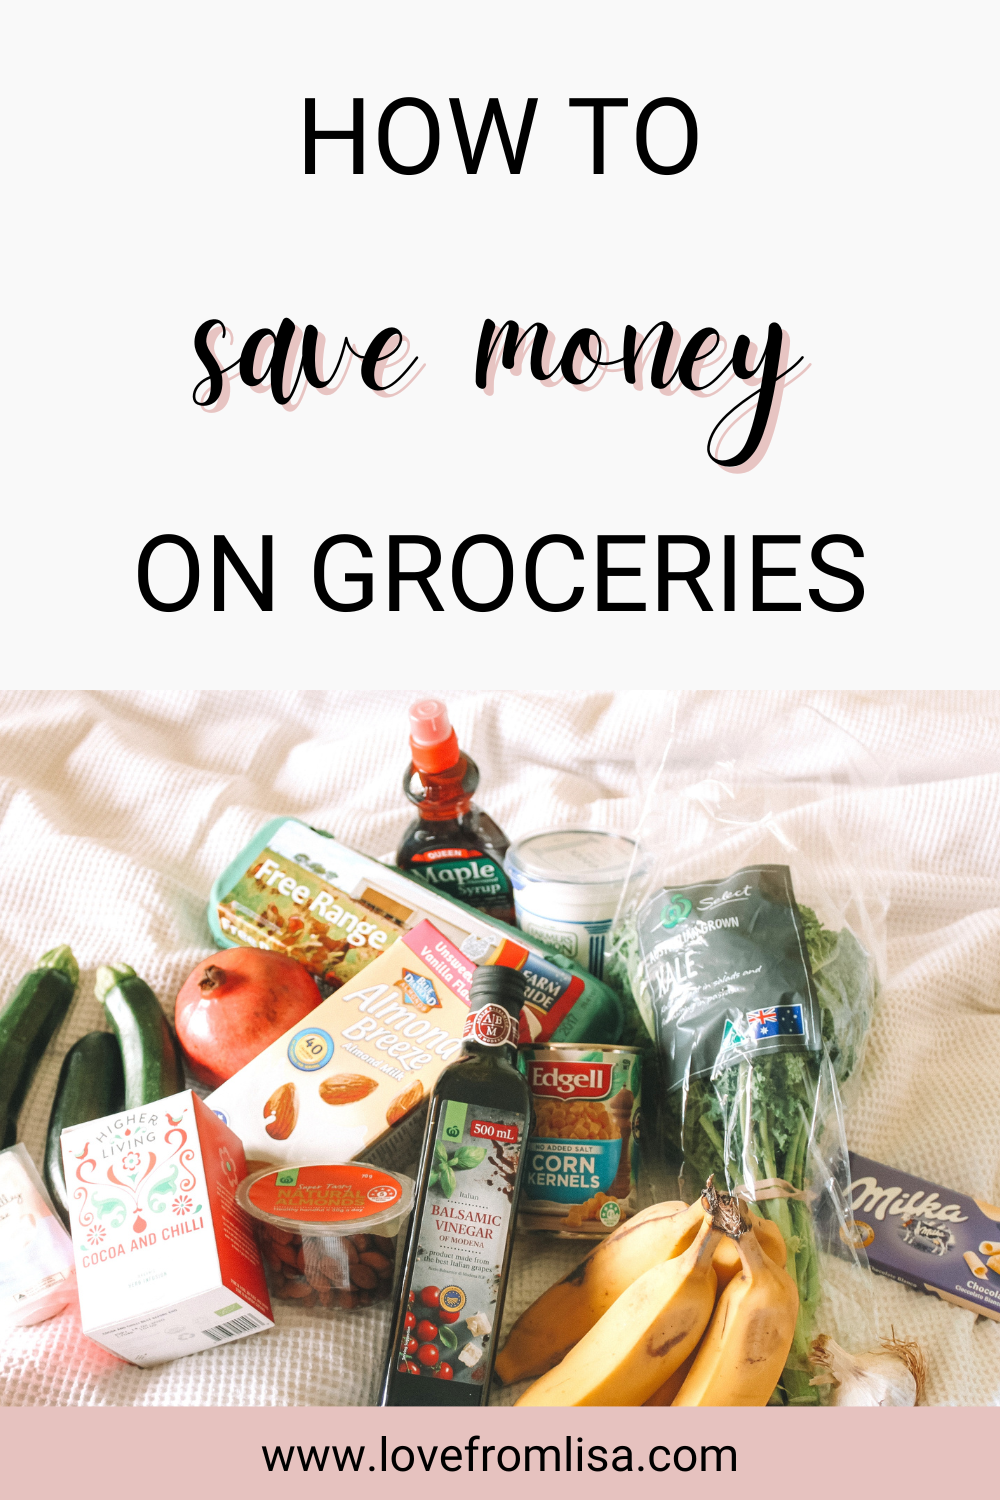 Tips on how to save money on groceries, how to save money at the supermarket, and how to reduce food bills.